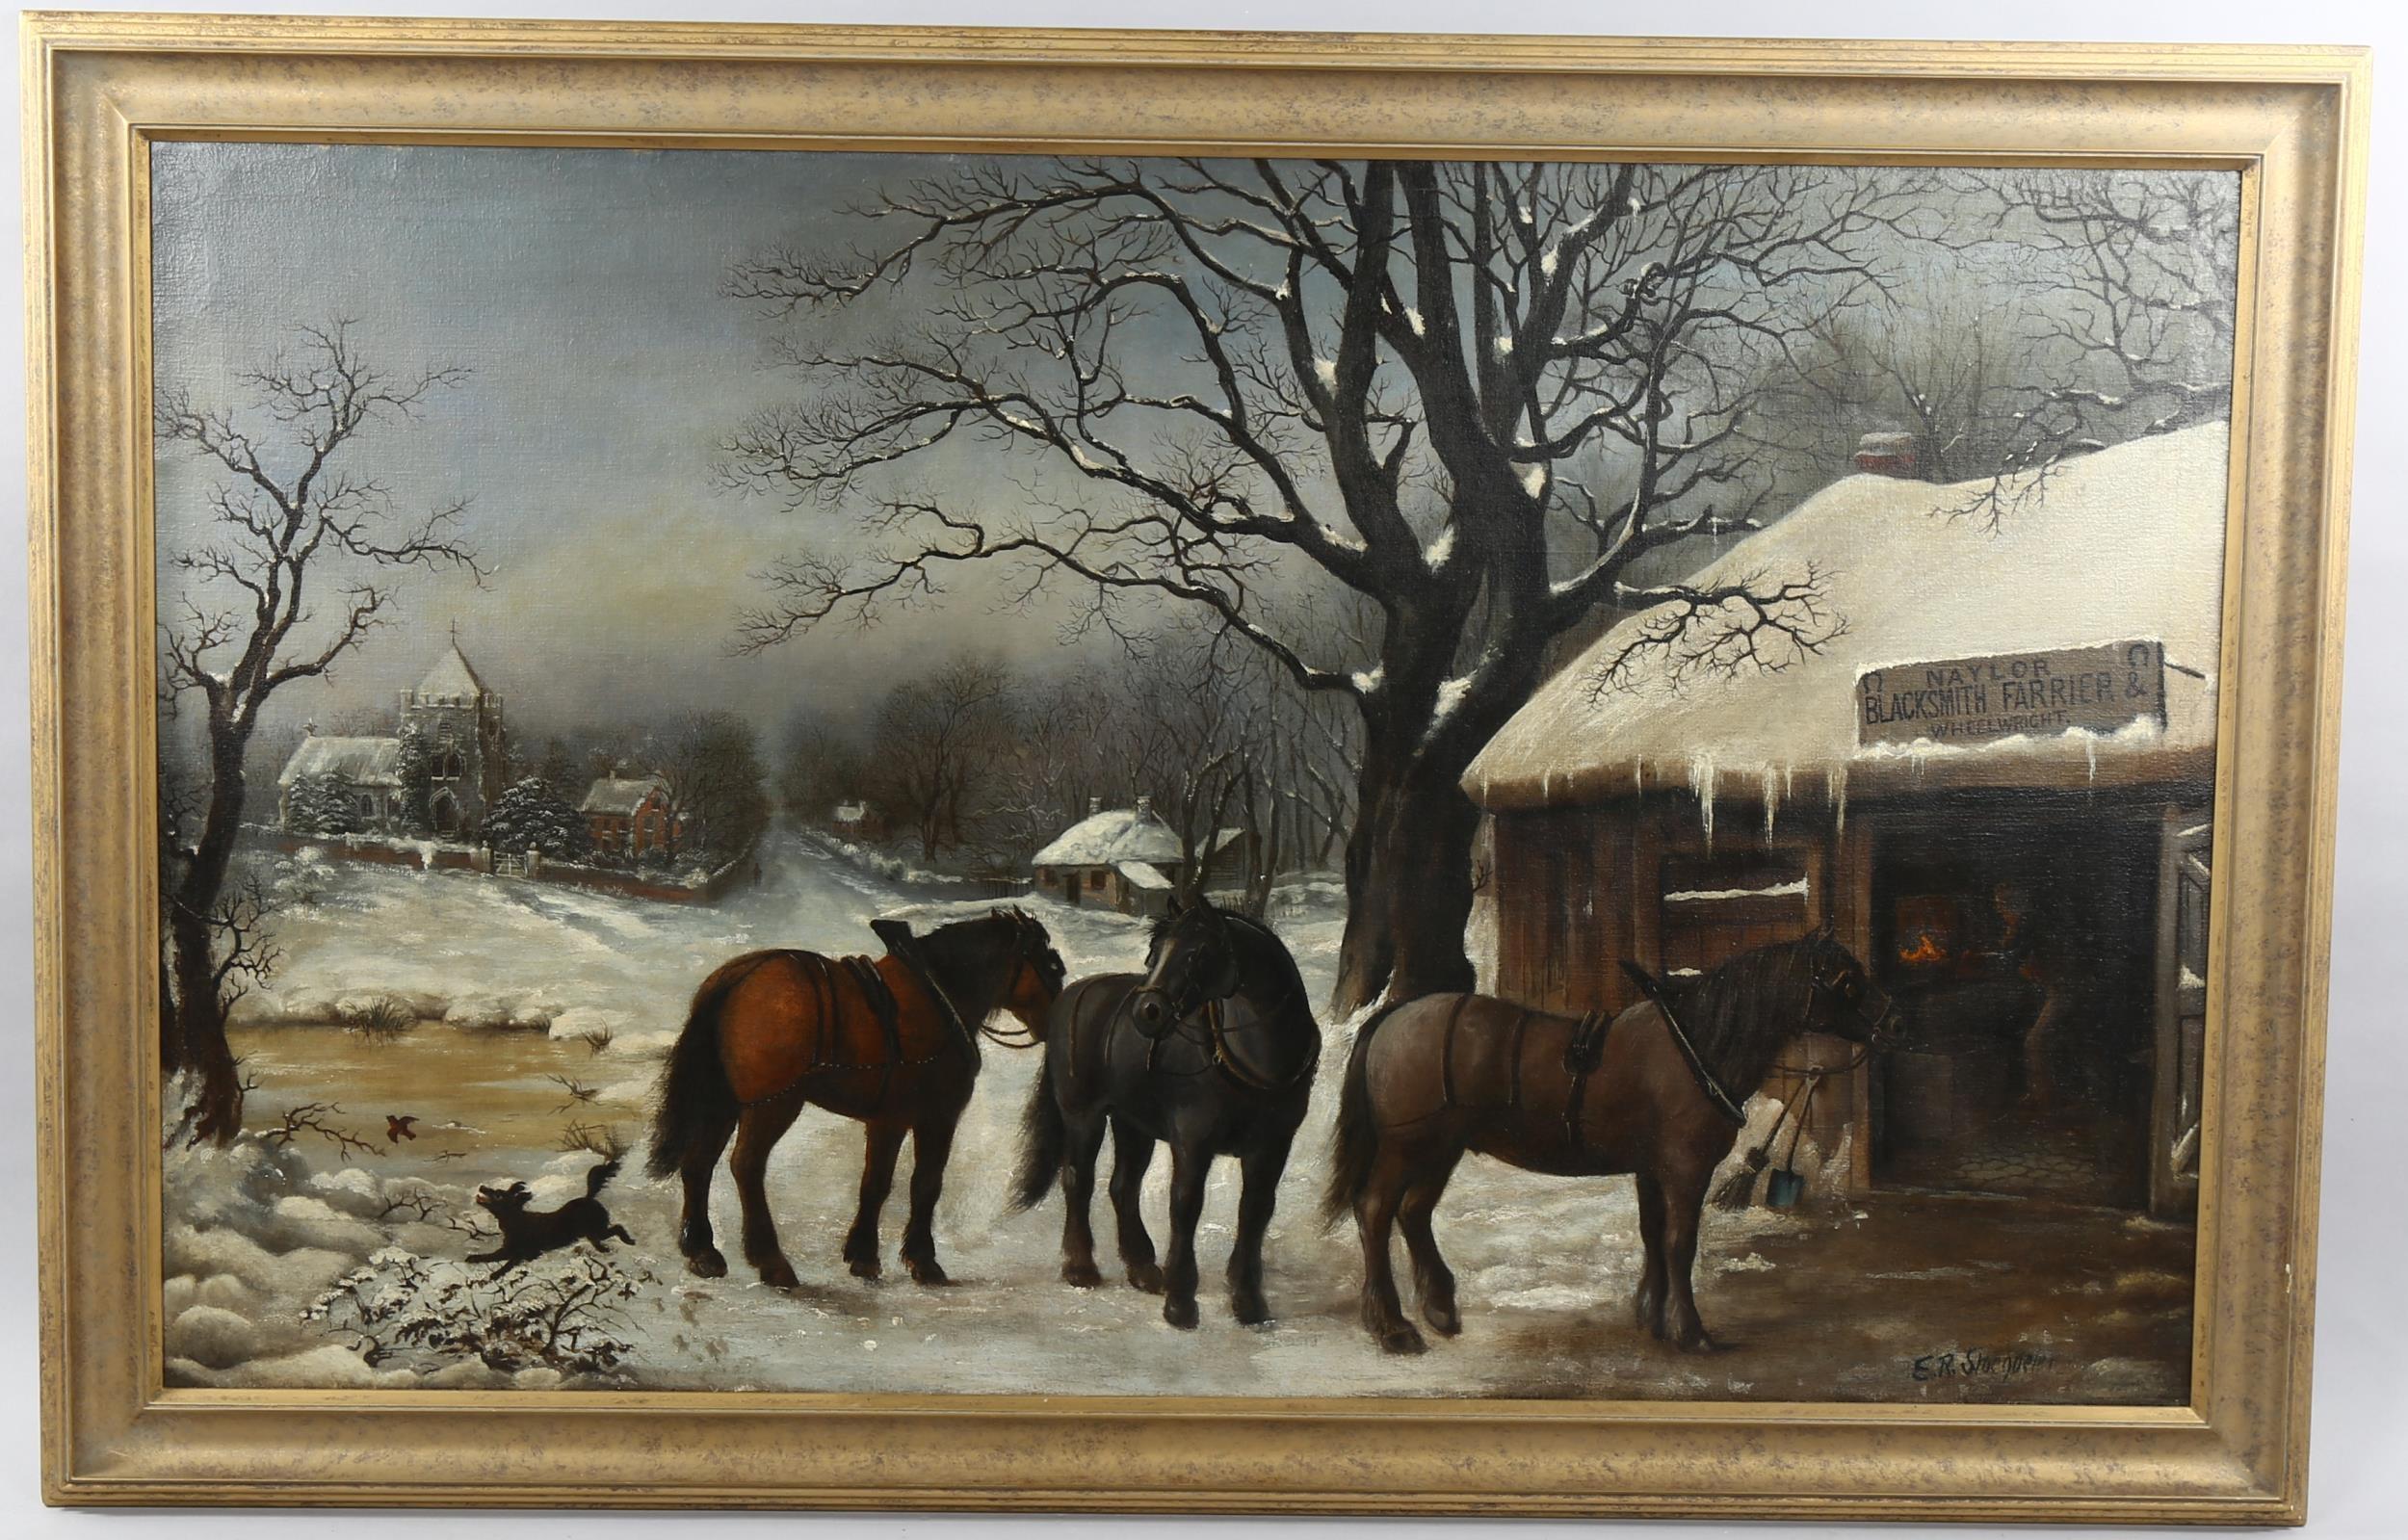 Edwin Roper Stocqueler (Australian - 1829 - 1895), oil on canvas, horses awaiting the blacksmith's in the snow, signed, 72cm x 119cm, framed
More Information
Canvas has been lined, good condition, no sign of previous damage tears or repairs, modern